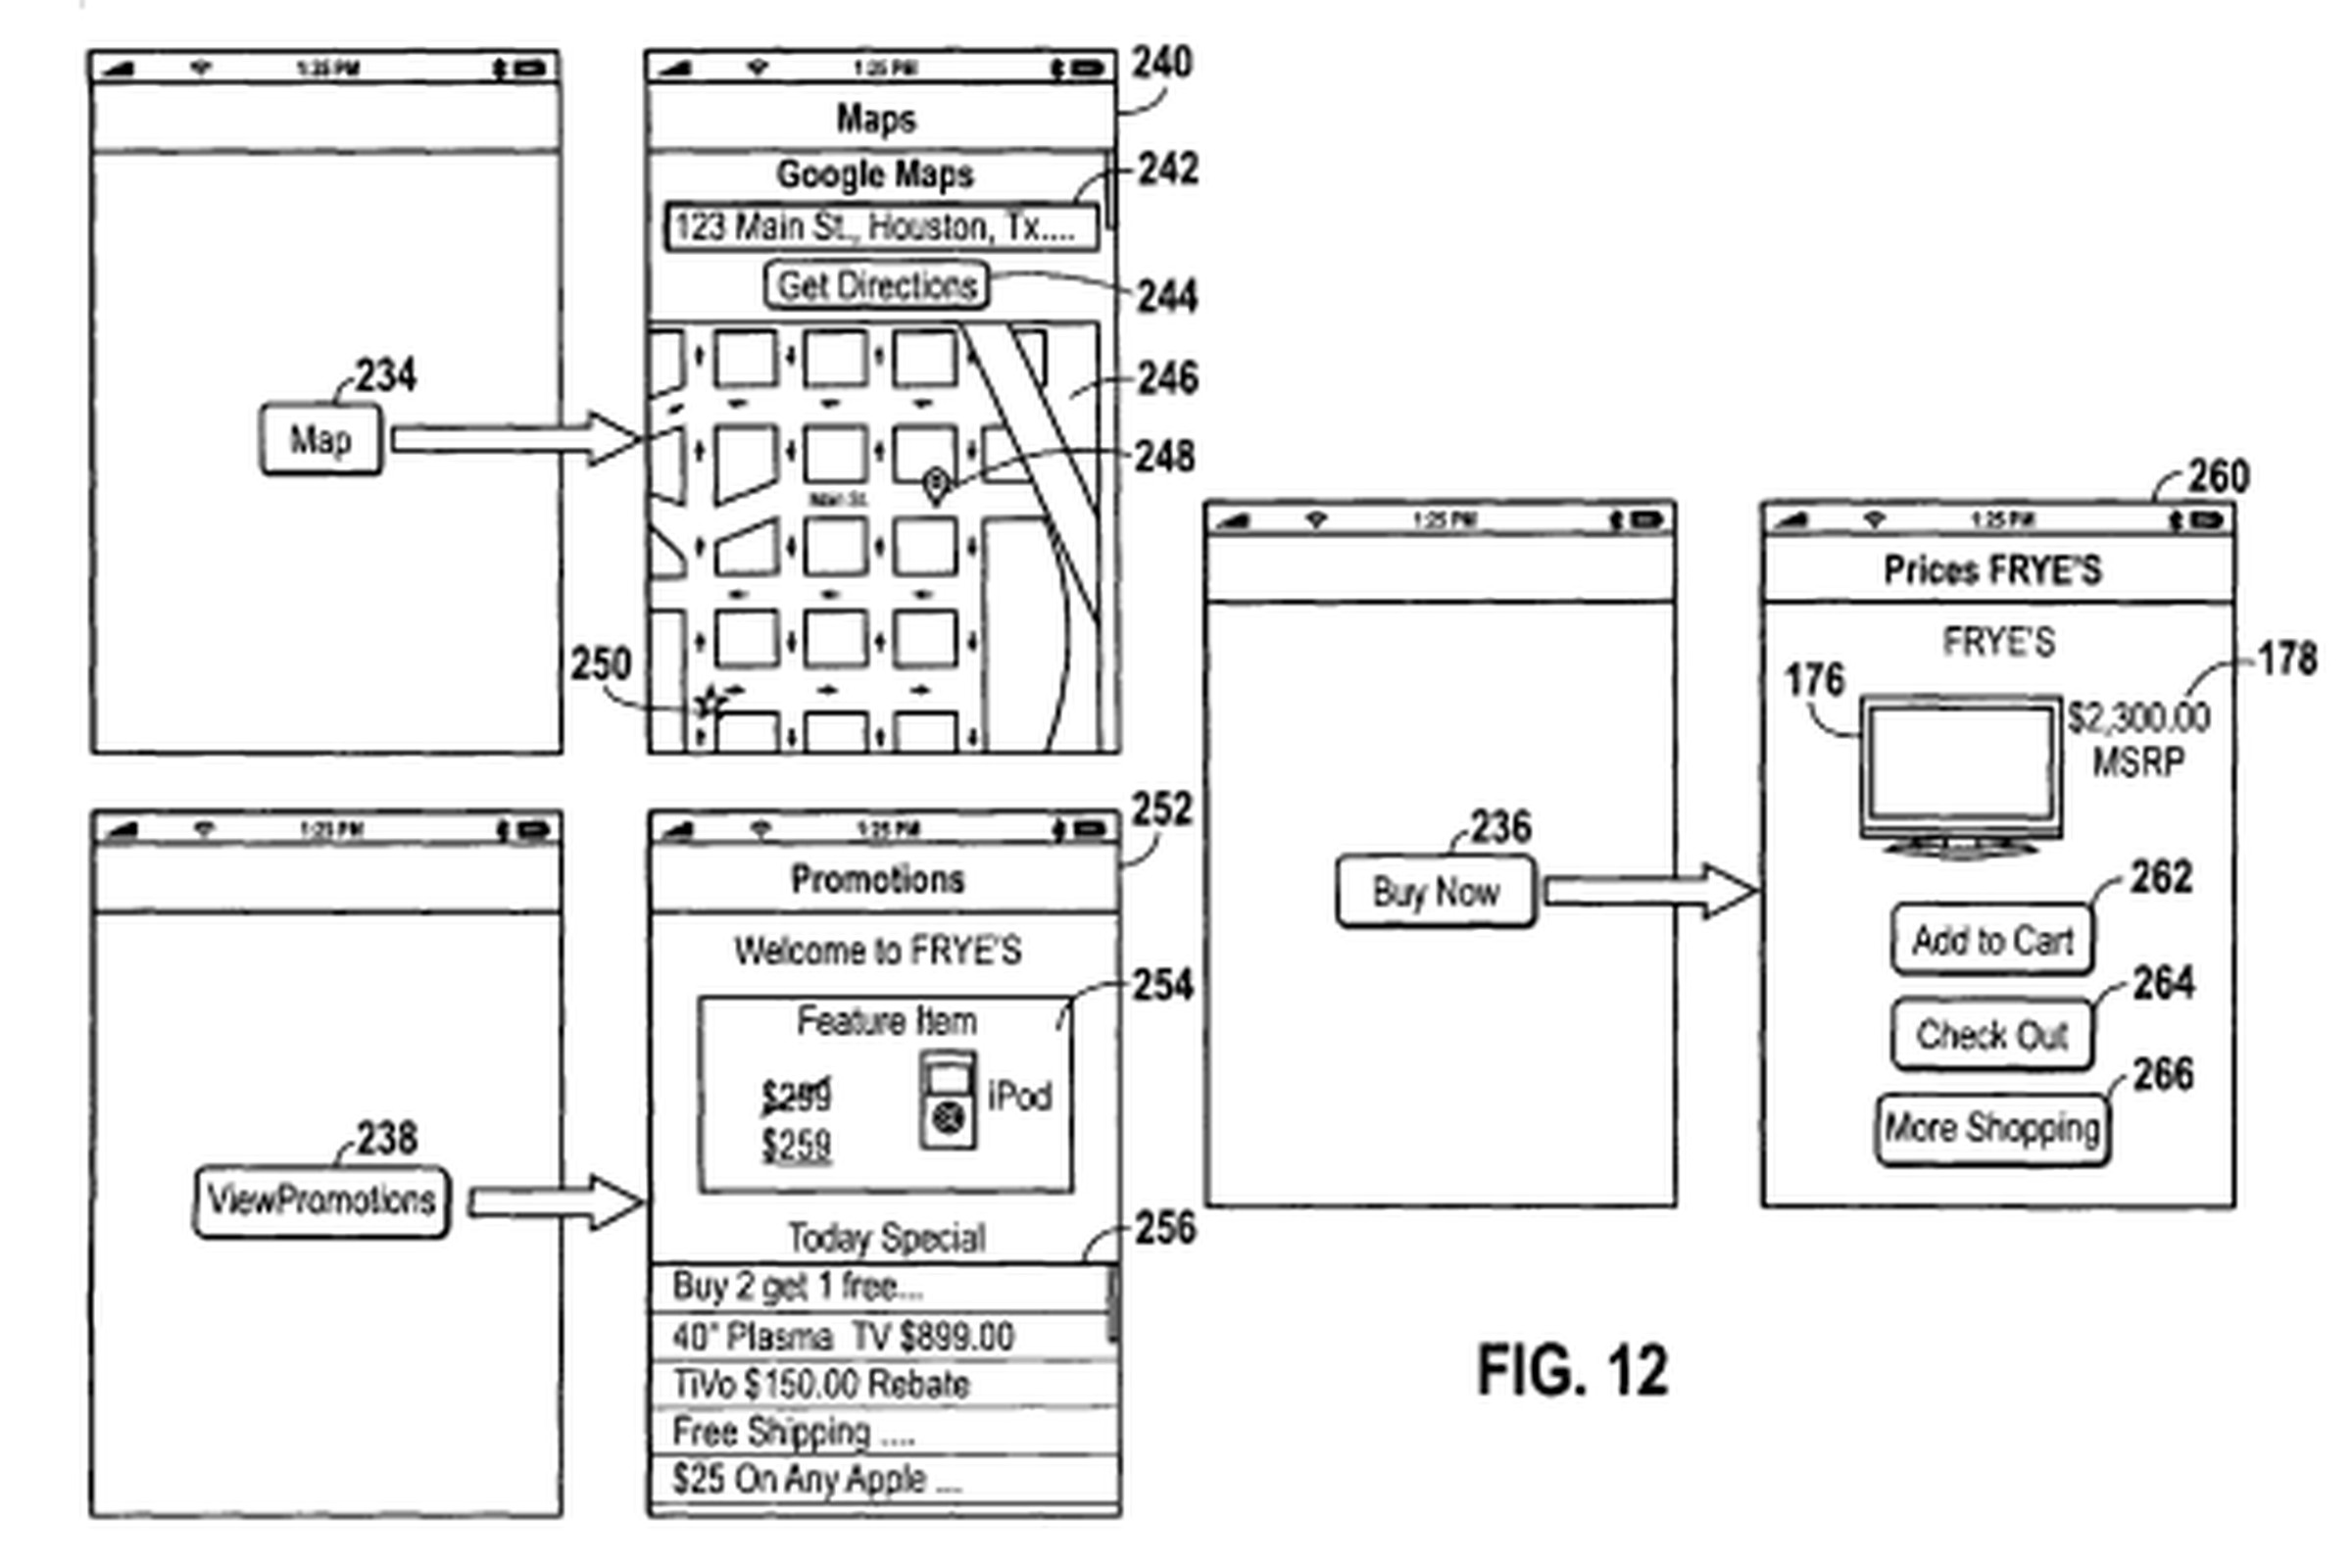 Apple Patent 2 "on-the-go shopping lists"